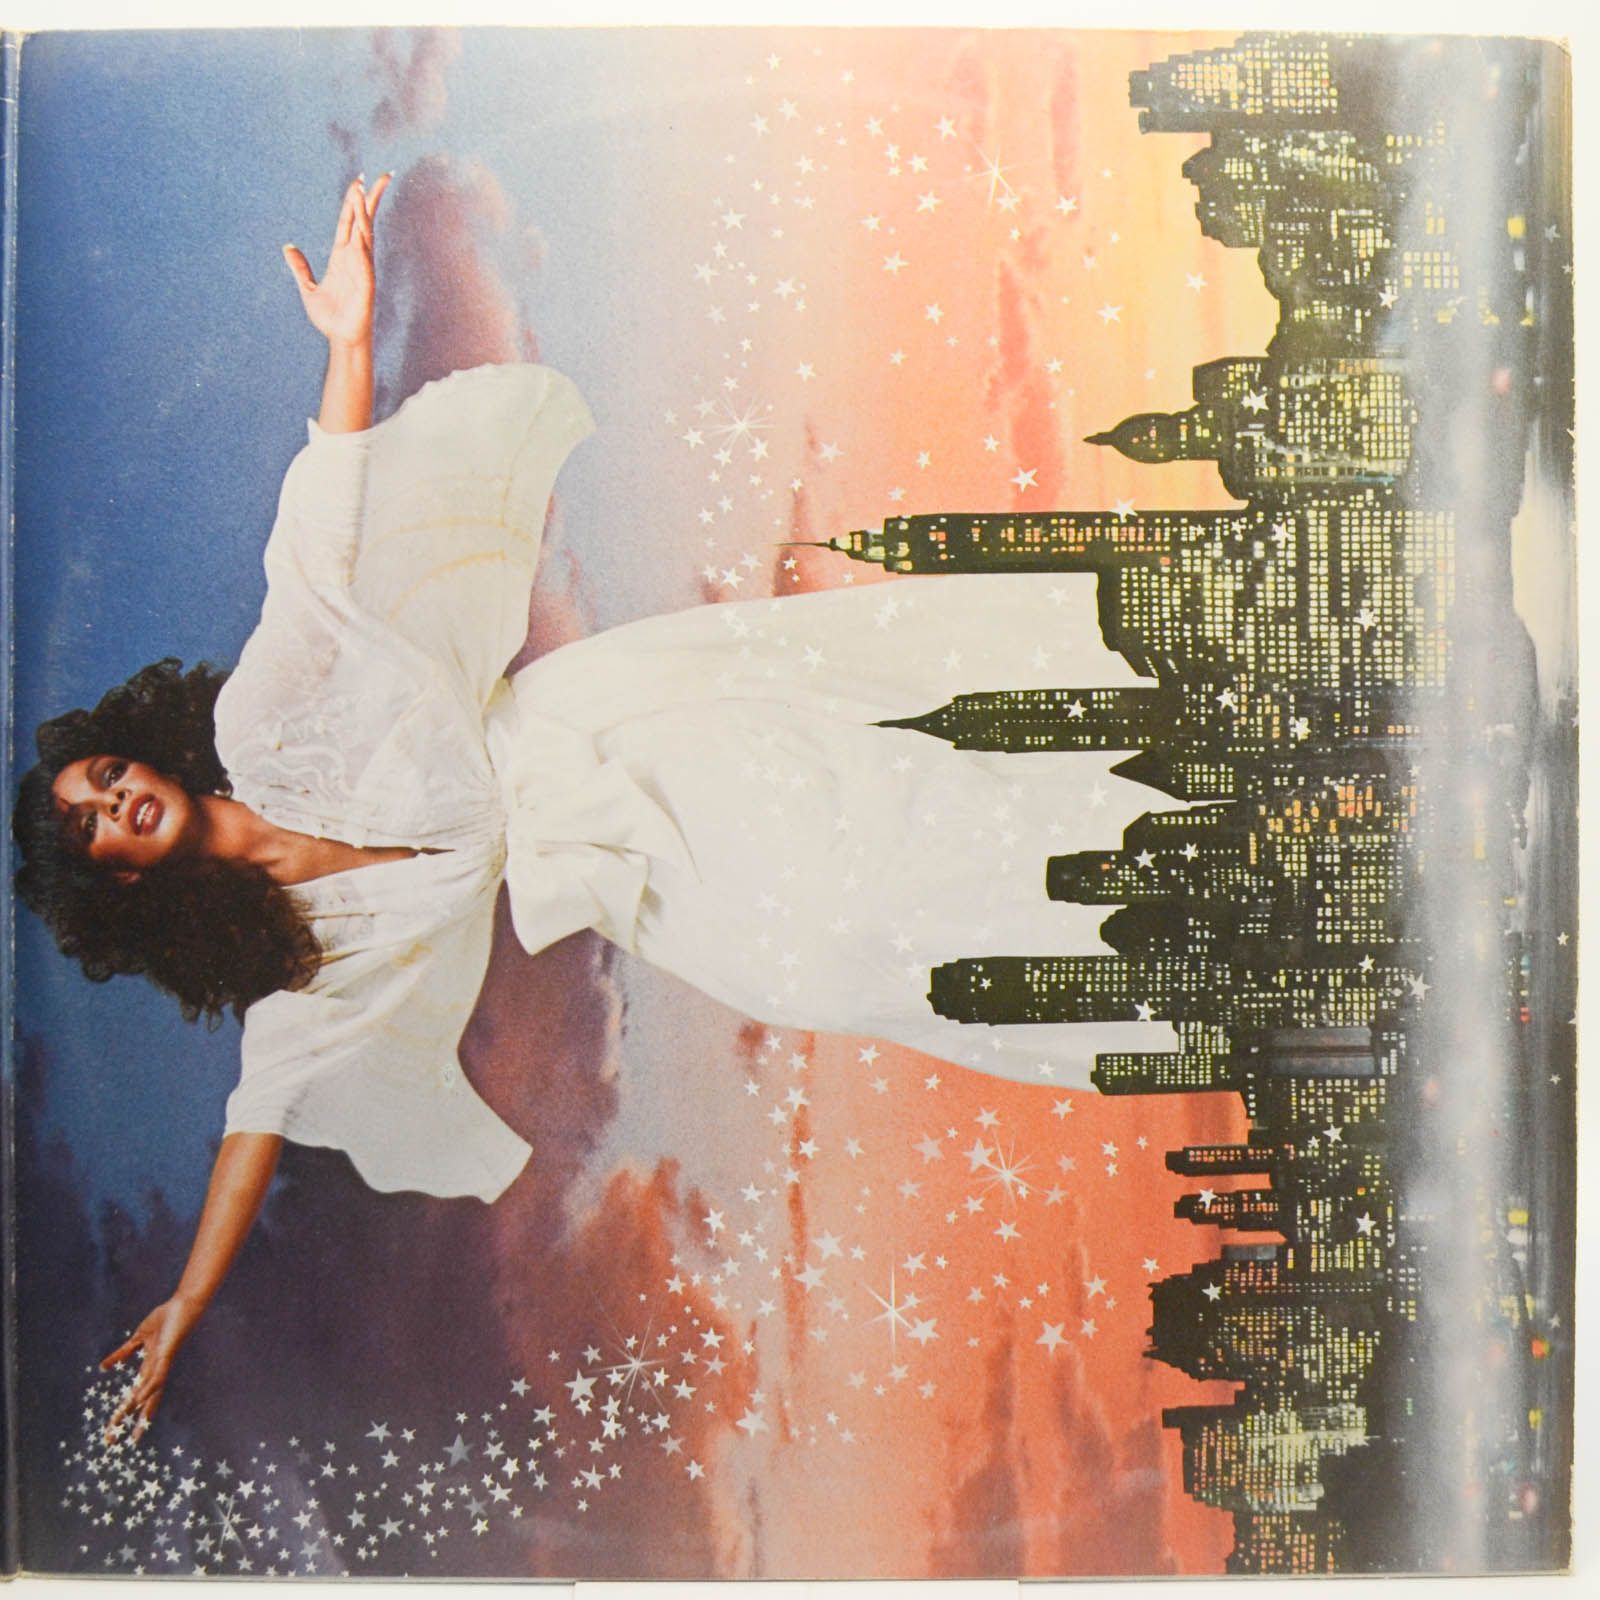 Donna Summer — Once Upon A Time... (2LP), 1977